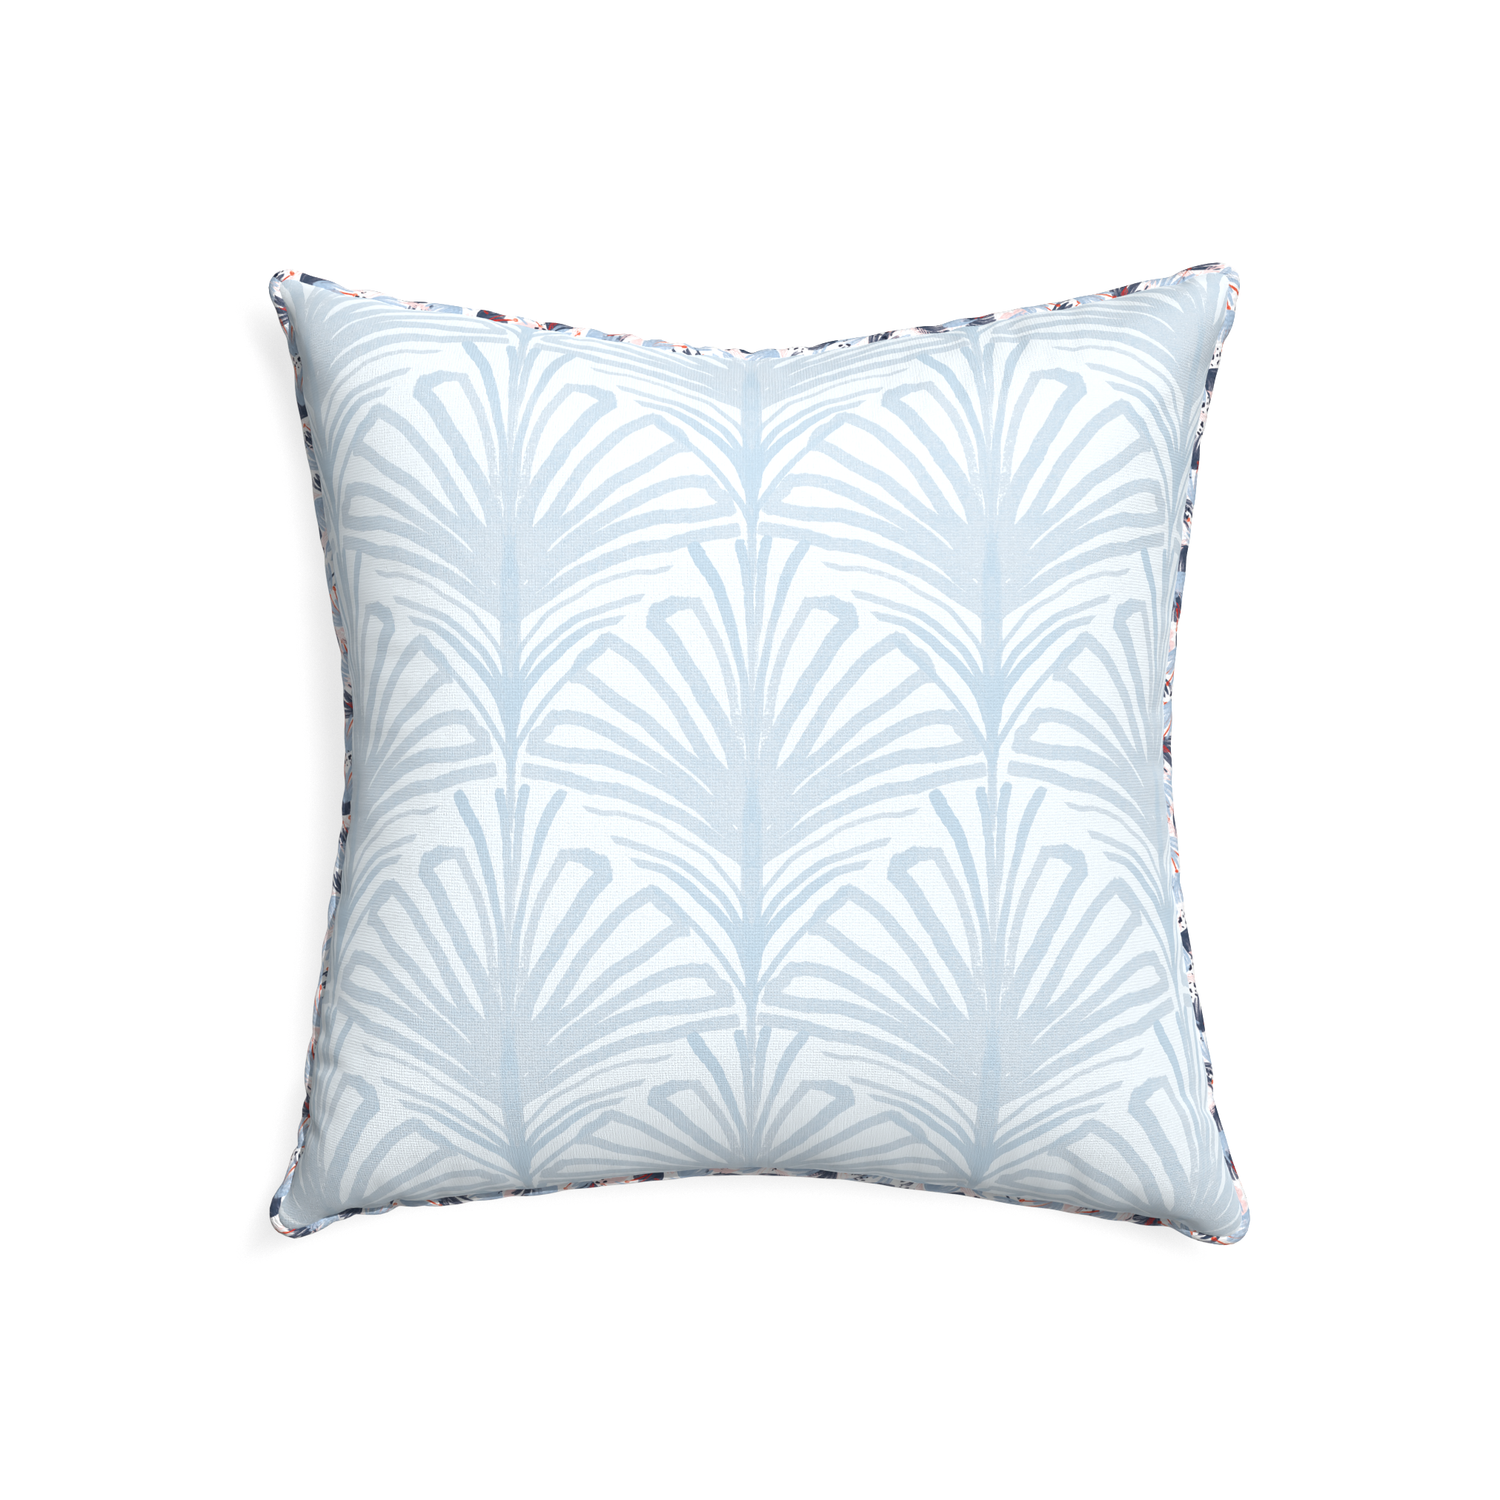 22-square suzy sky custom pillow with e piping on white background